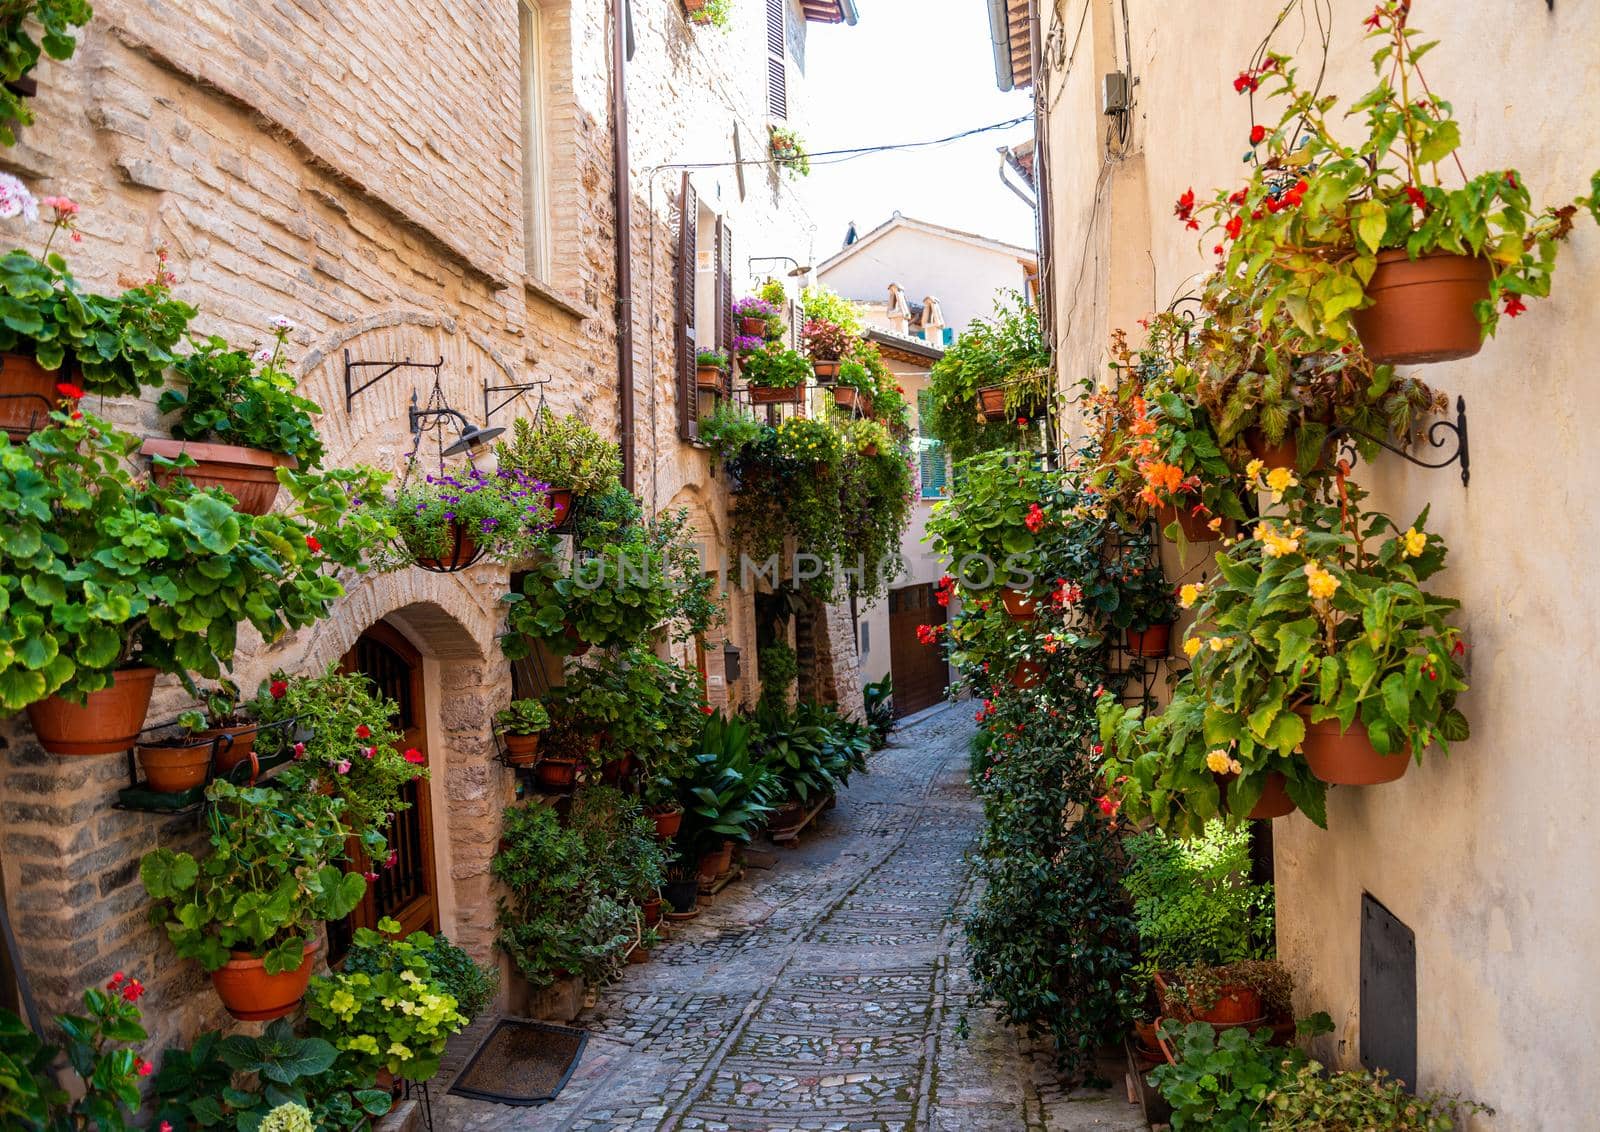 alley with flowers in the town of Spello by carfedeph